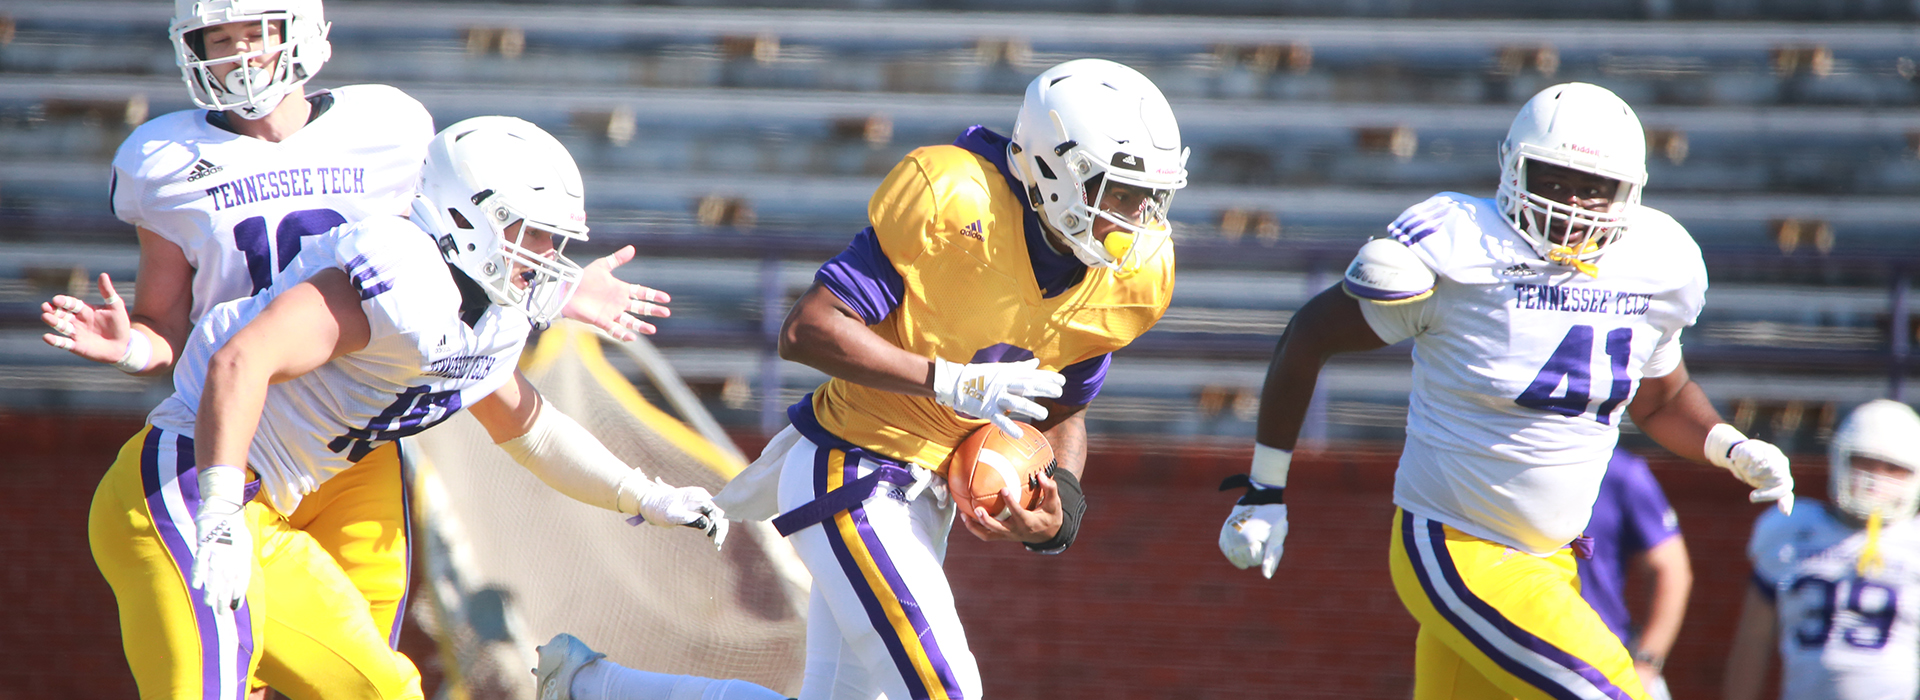 Start times announced for spring Tennessee Tech football games